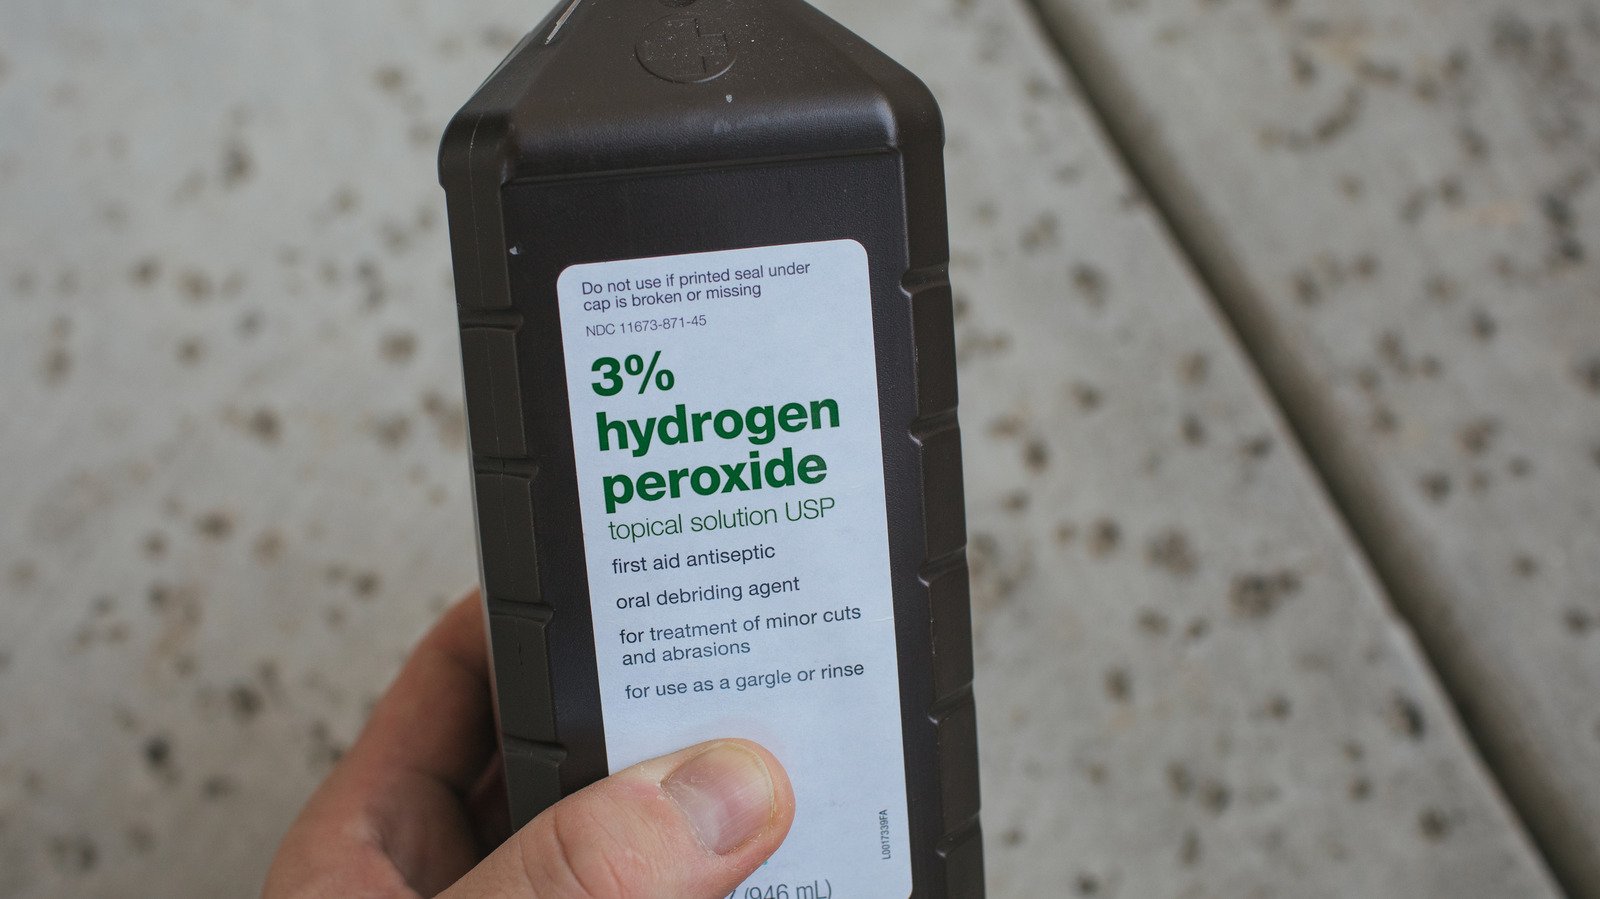 Never Use Hydrogen Peroxide On Your Skin. Here's Why.